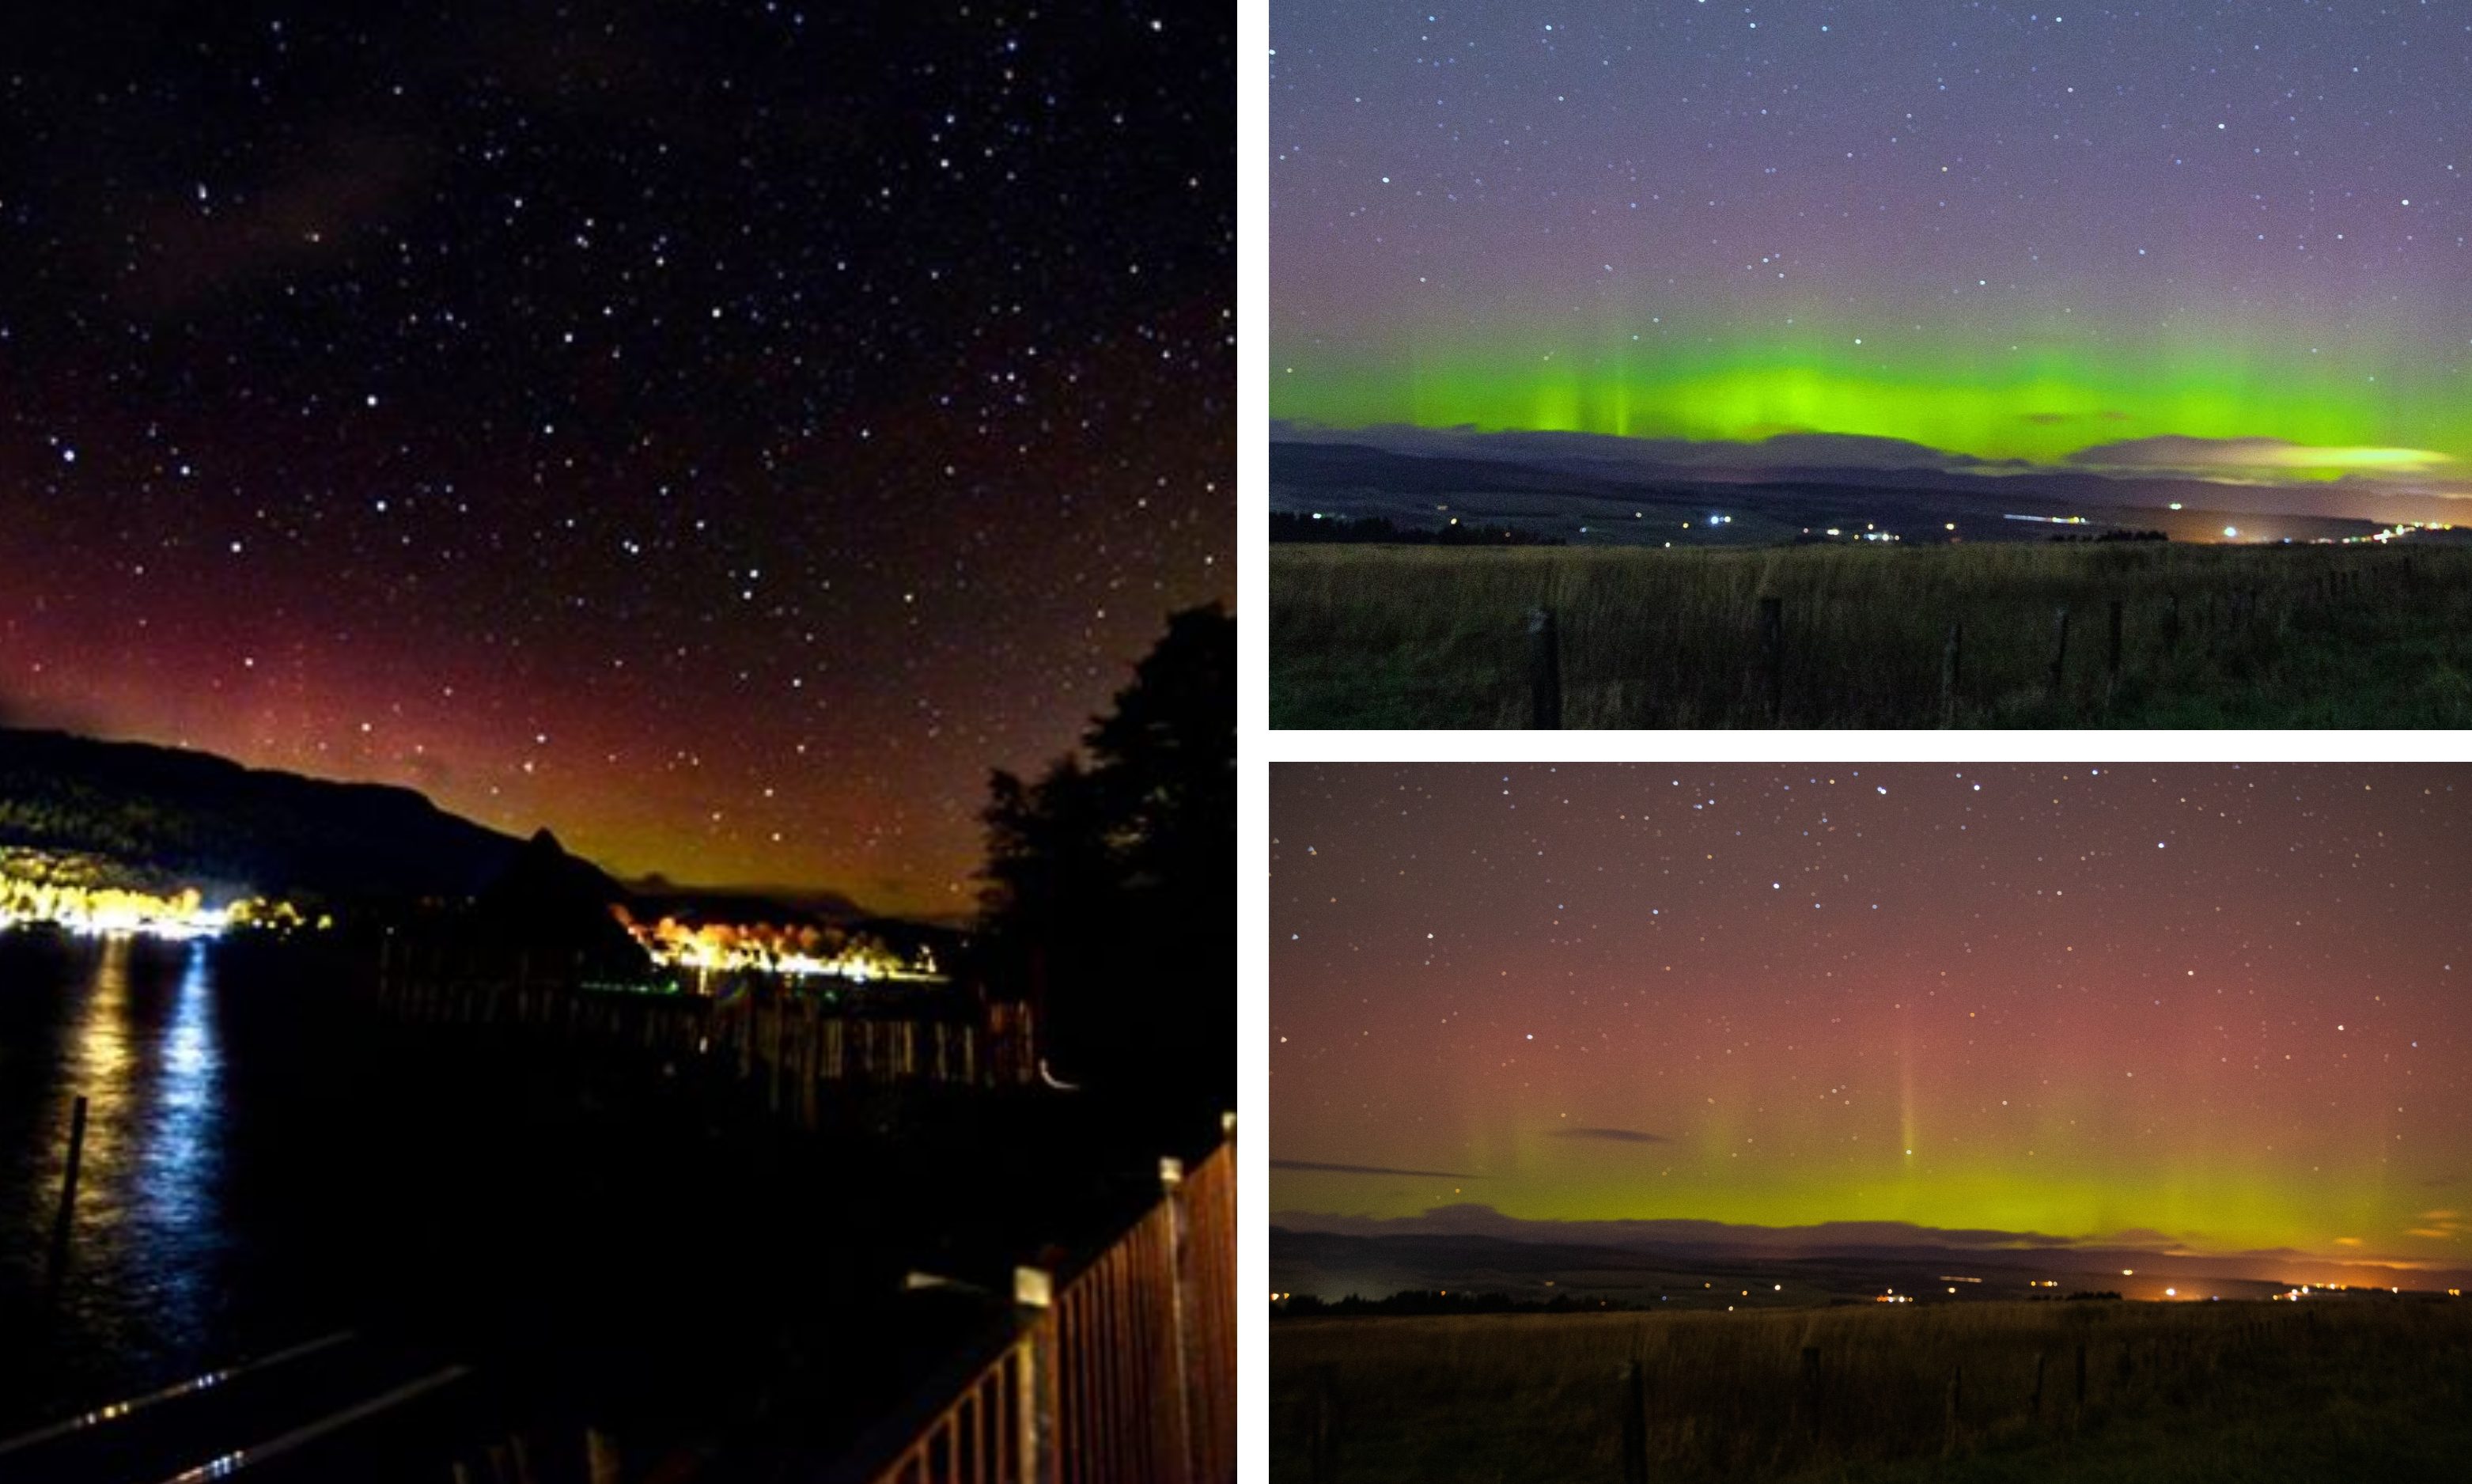 The Northern Lights in Perthshire. Photos on the right taken by Images of Scotland. The one on the left is by Bulldog Photography.